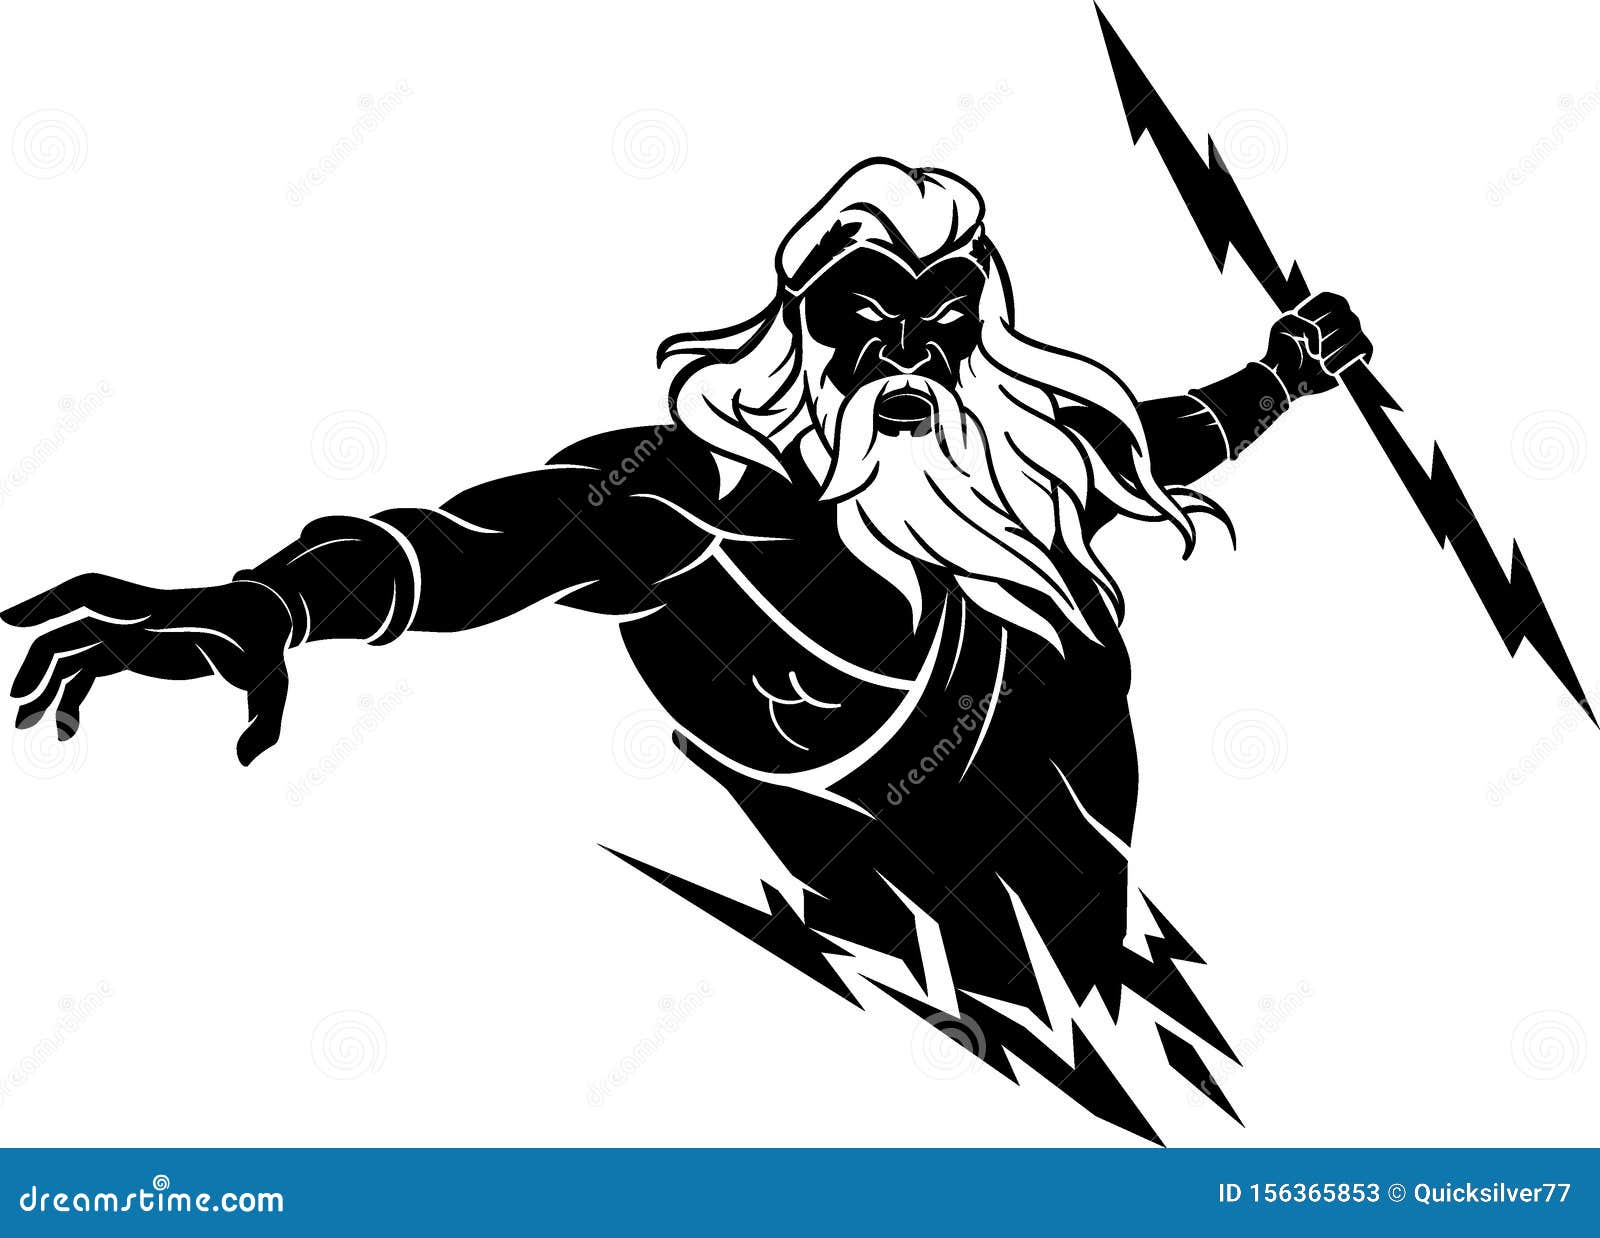 Zeus Cartoons, Illustrations & Vector Stock Images - 2420 Pictures to